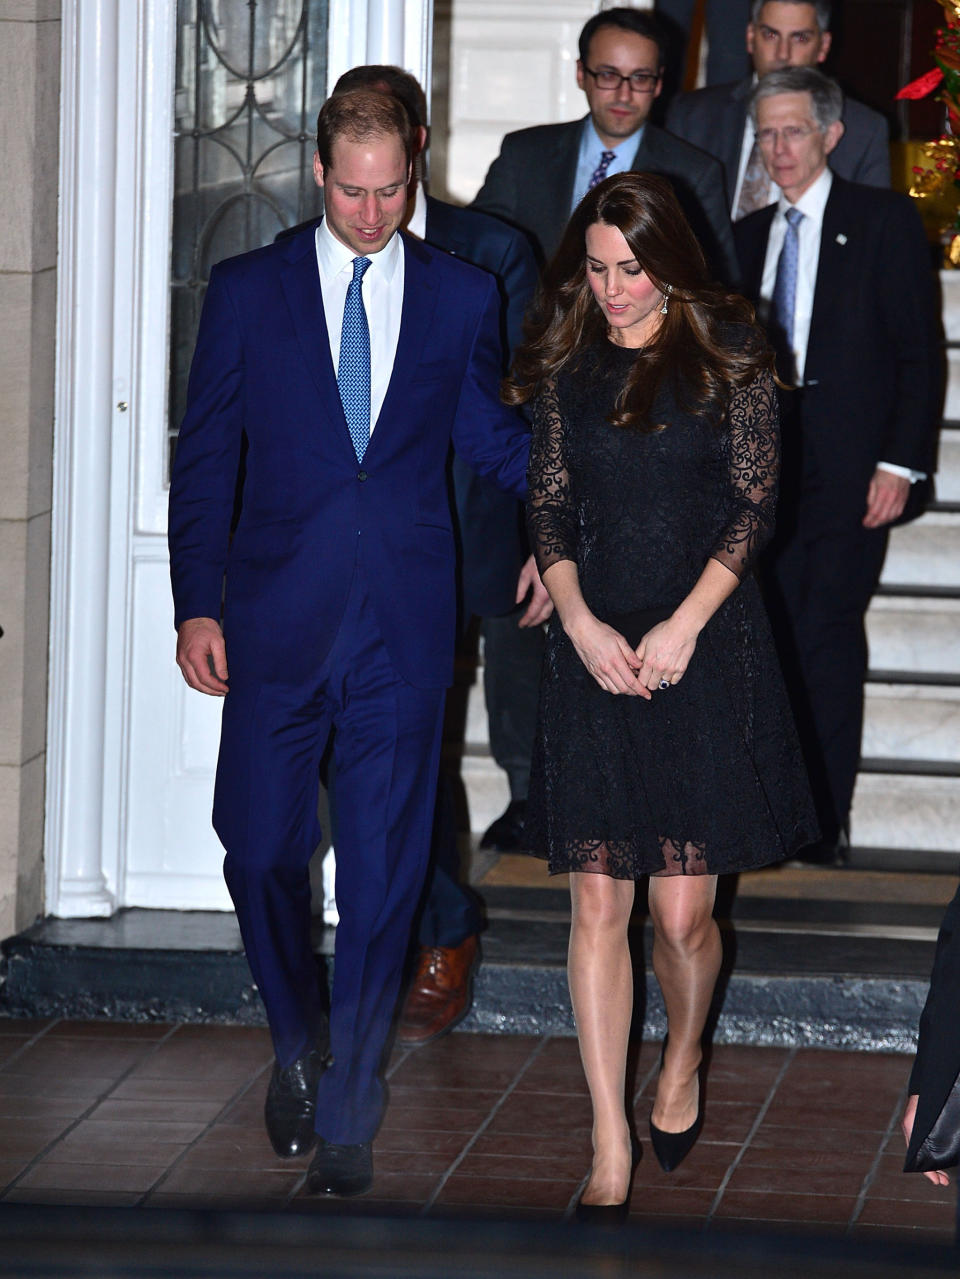 Duchess of Cambridge in New York with Prince William